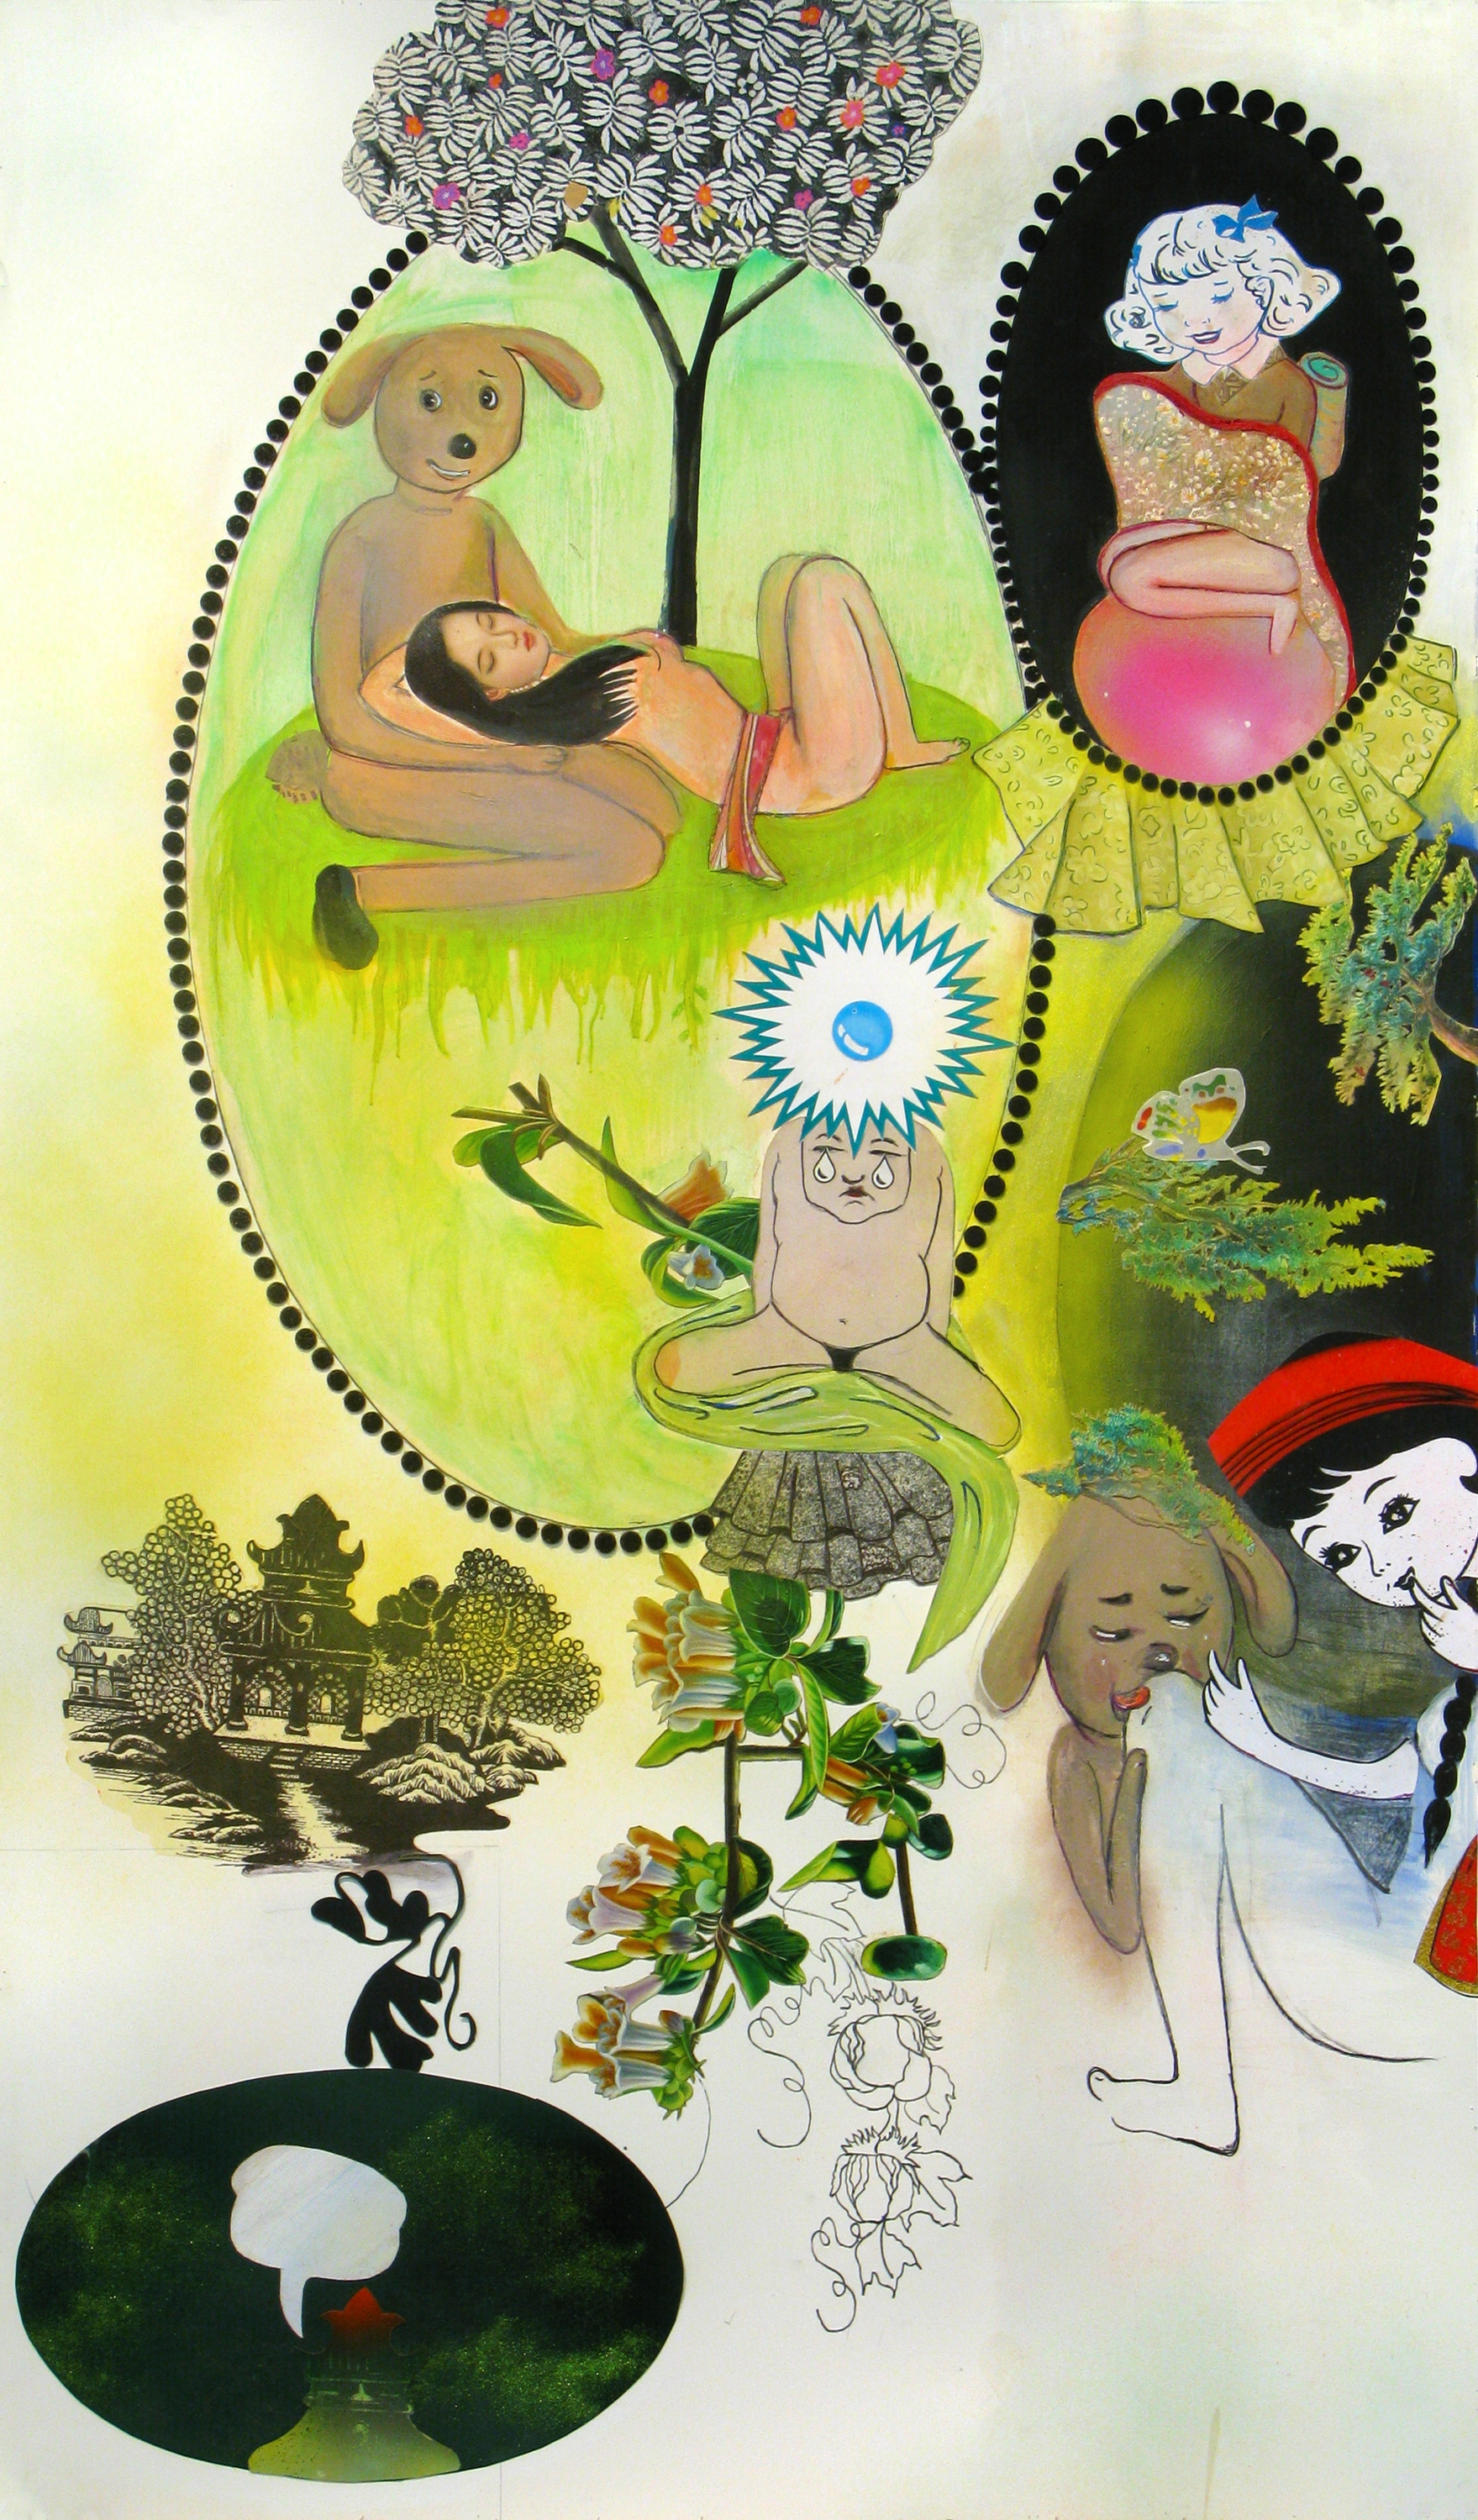 You Are in My Thoughts (Where Have You Been?), 60" × 35", mixed media collage drawing, 2009